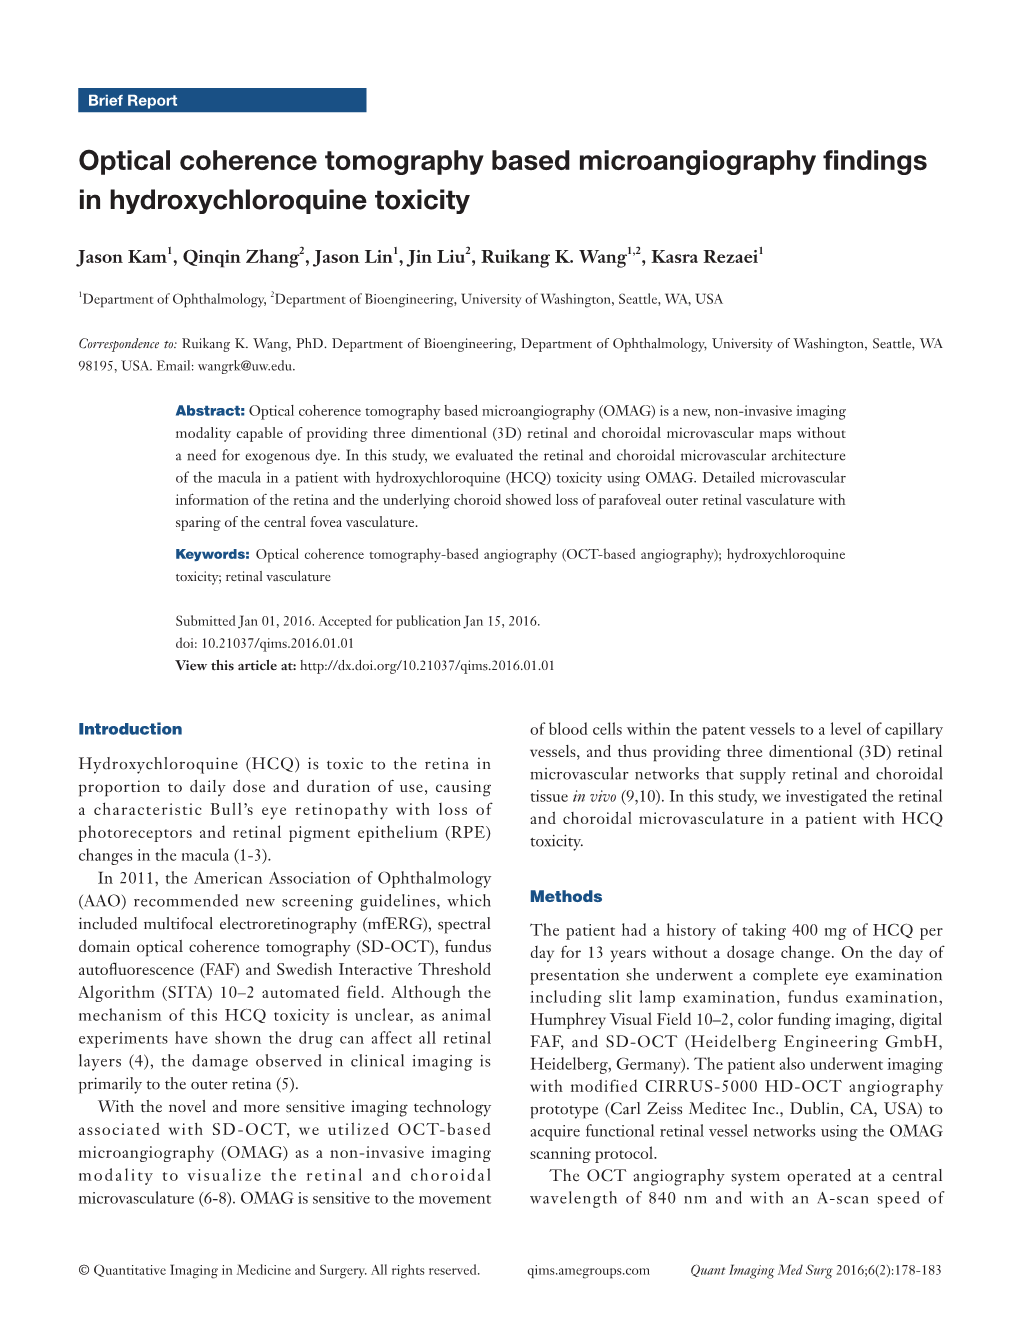 Optical Coherence Tomography Based Microangiography Findings in Hydroxychloroquine Toxicity